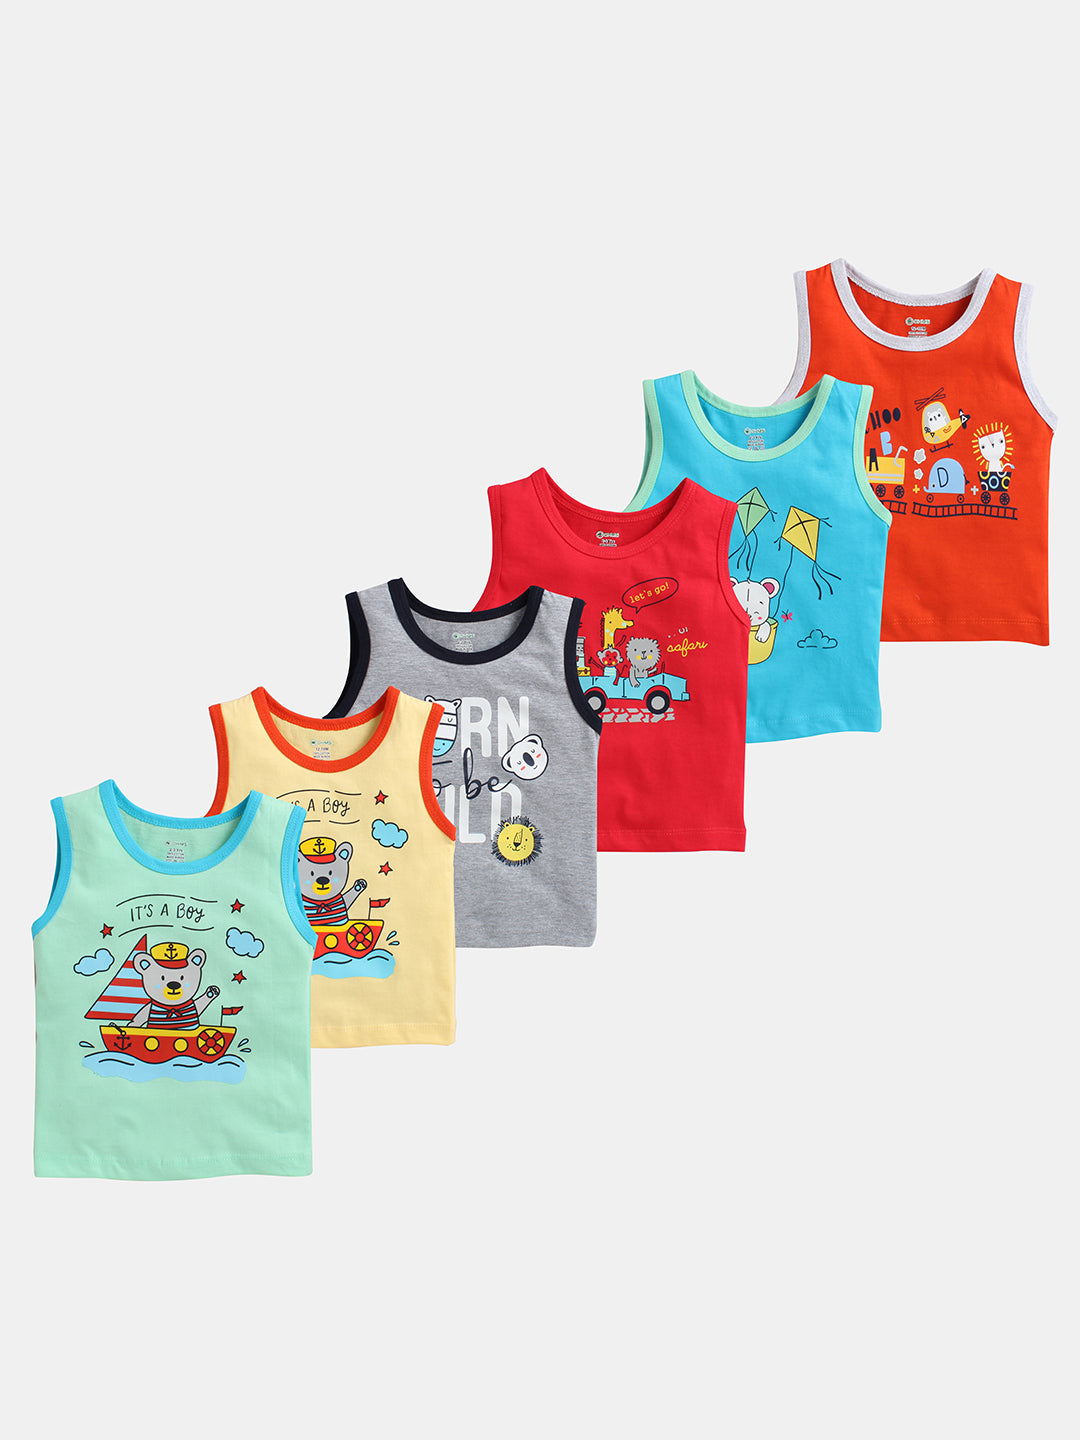 Boys Casual tops  sleeveless Vests Pack of 6